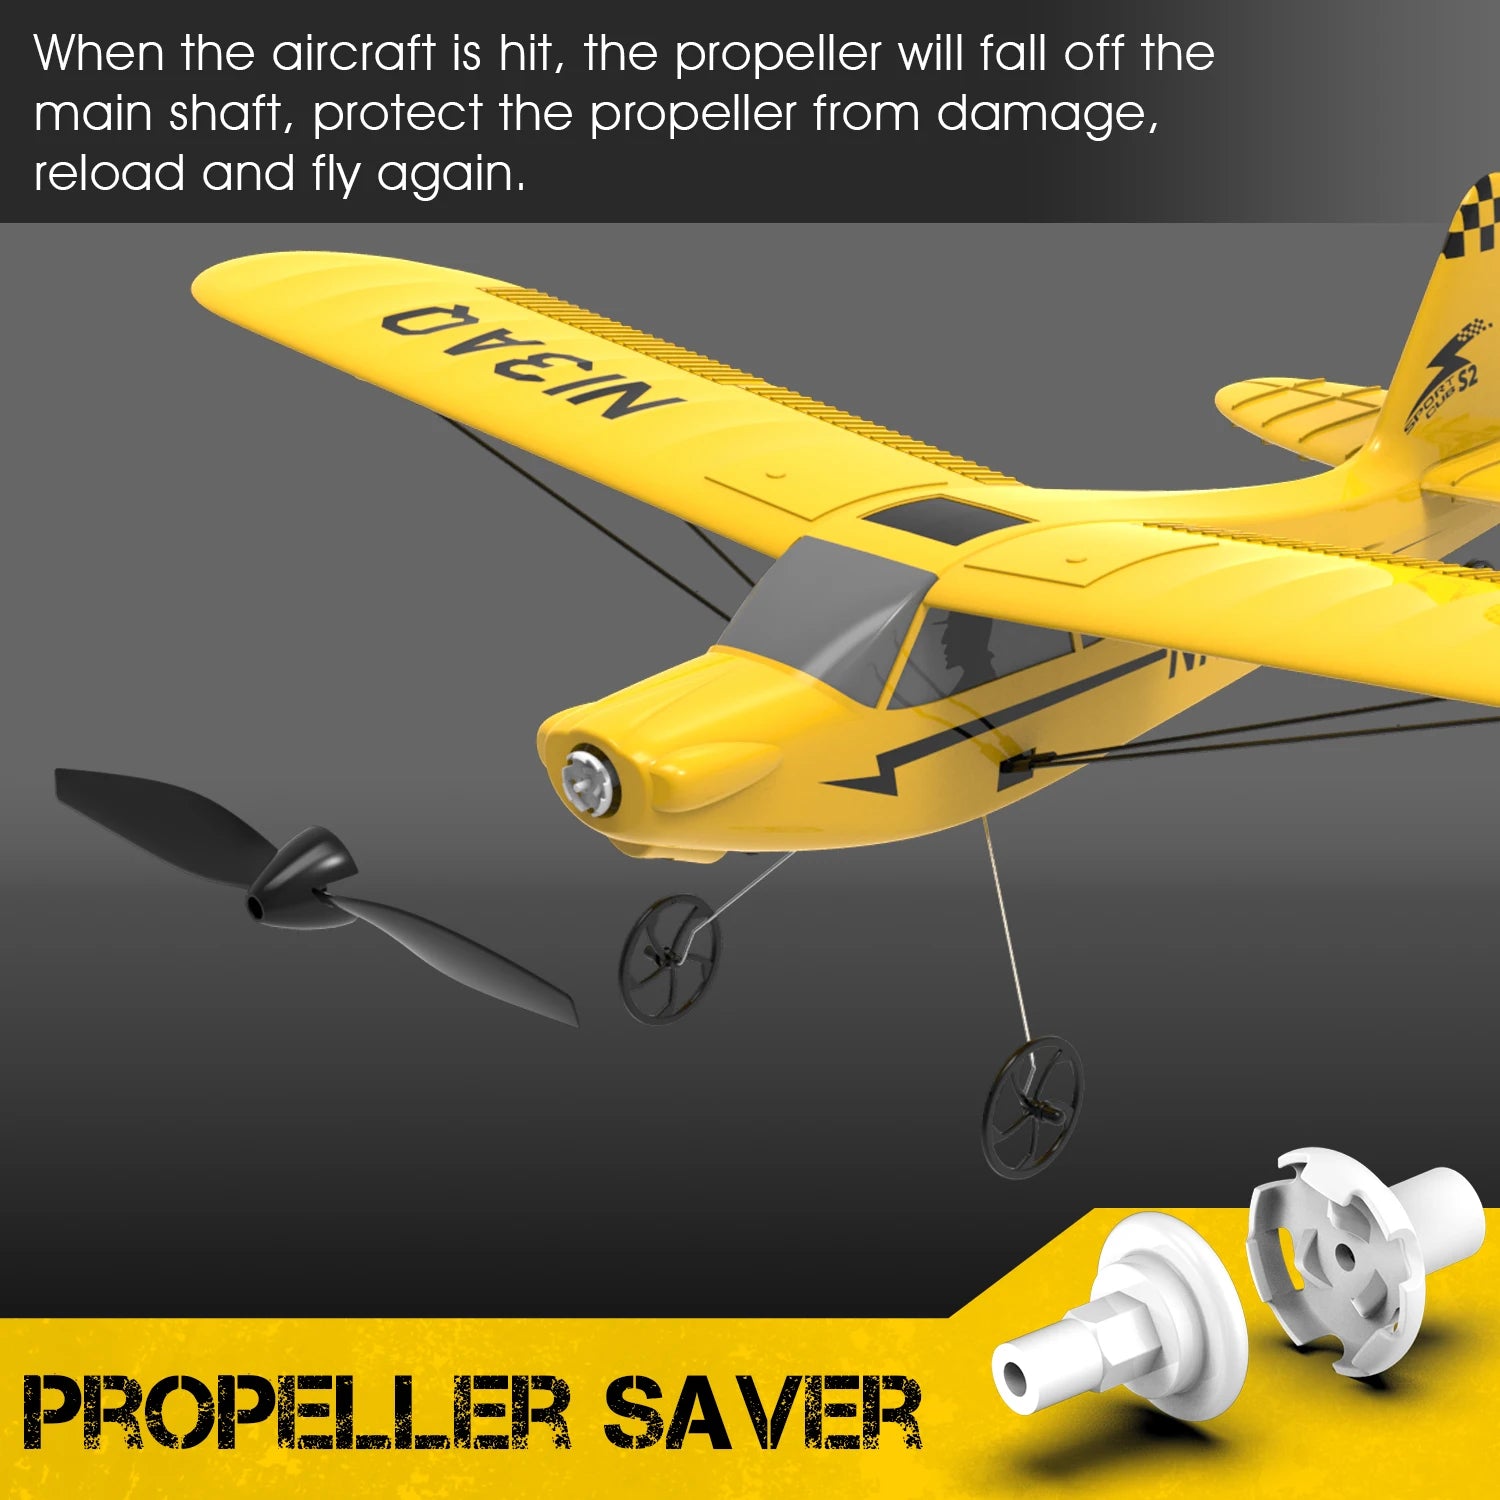 EPP 400mm RC Plane, if the aircraft is hit, the propeller will fall off the main shaft, protect the